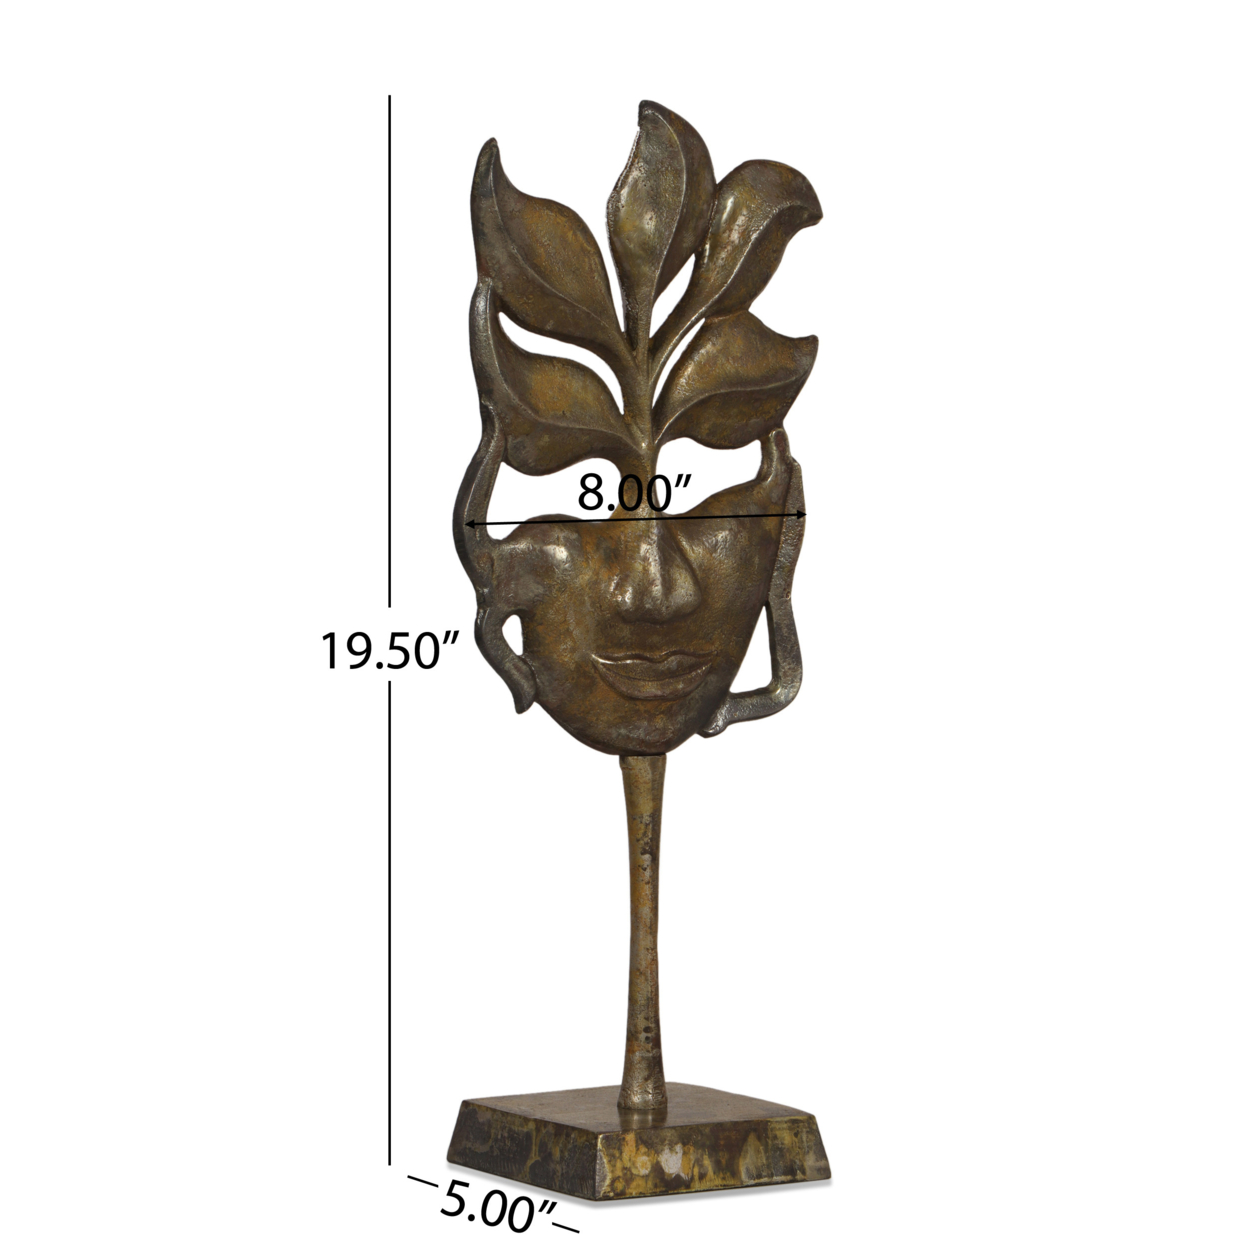 Caine Handcrafted Aluminum Decorative Face Accessory With Stand, Brass